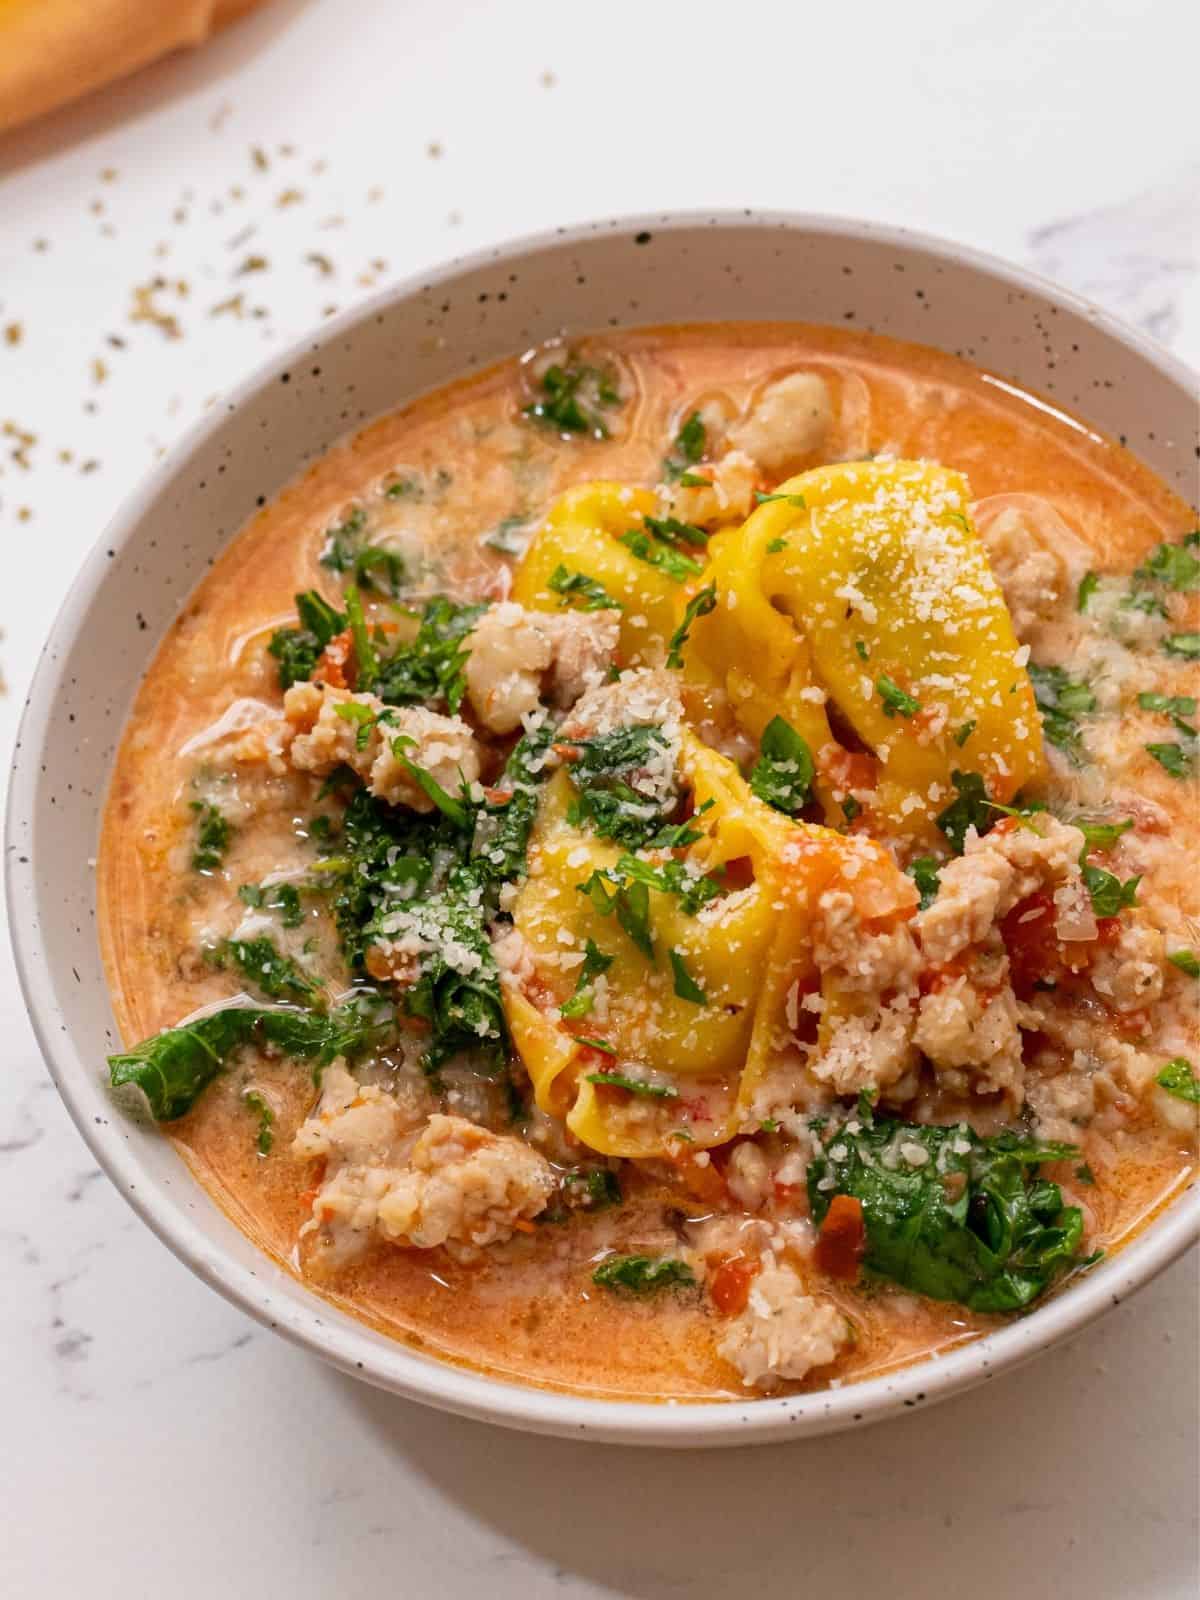 Bowl of tortellini soup with sausage and greens.